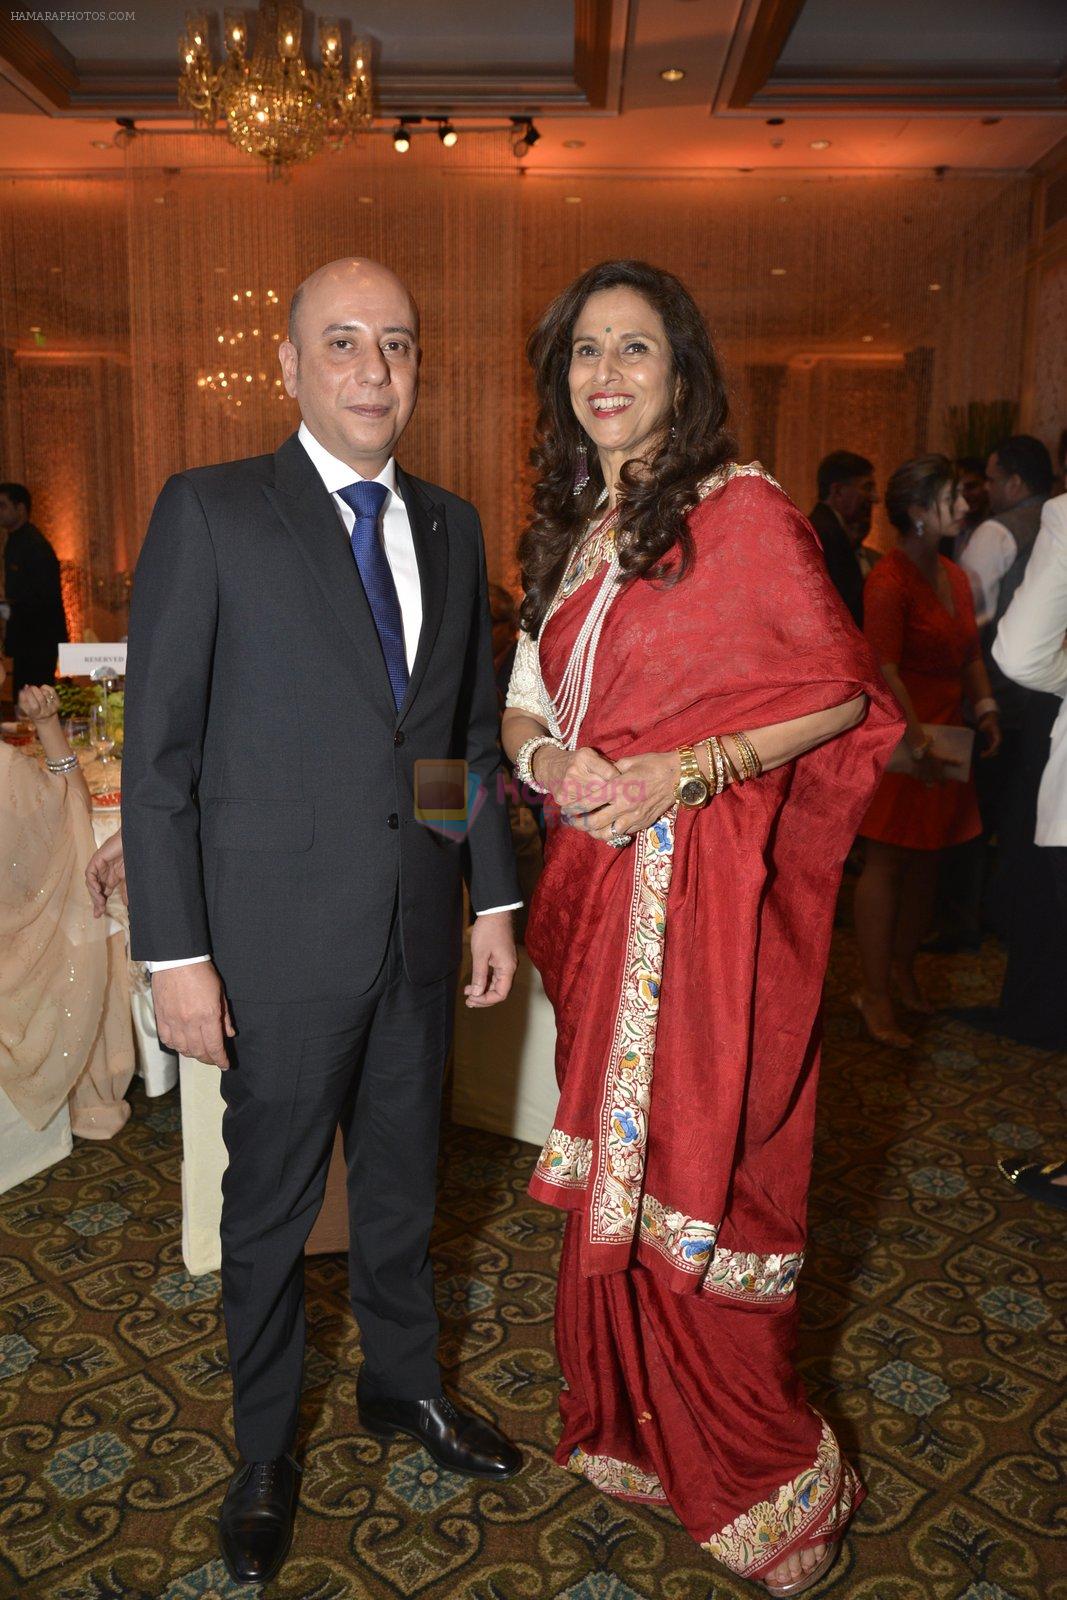 Shobhaa De at Zubin Mehta dinner hosted by Rolex on 17th April 2016